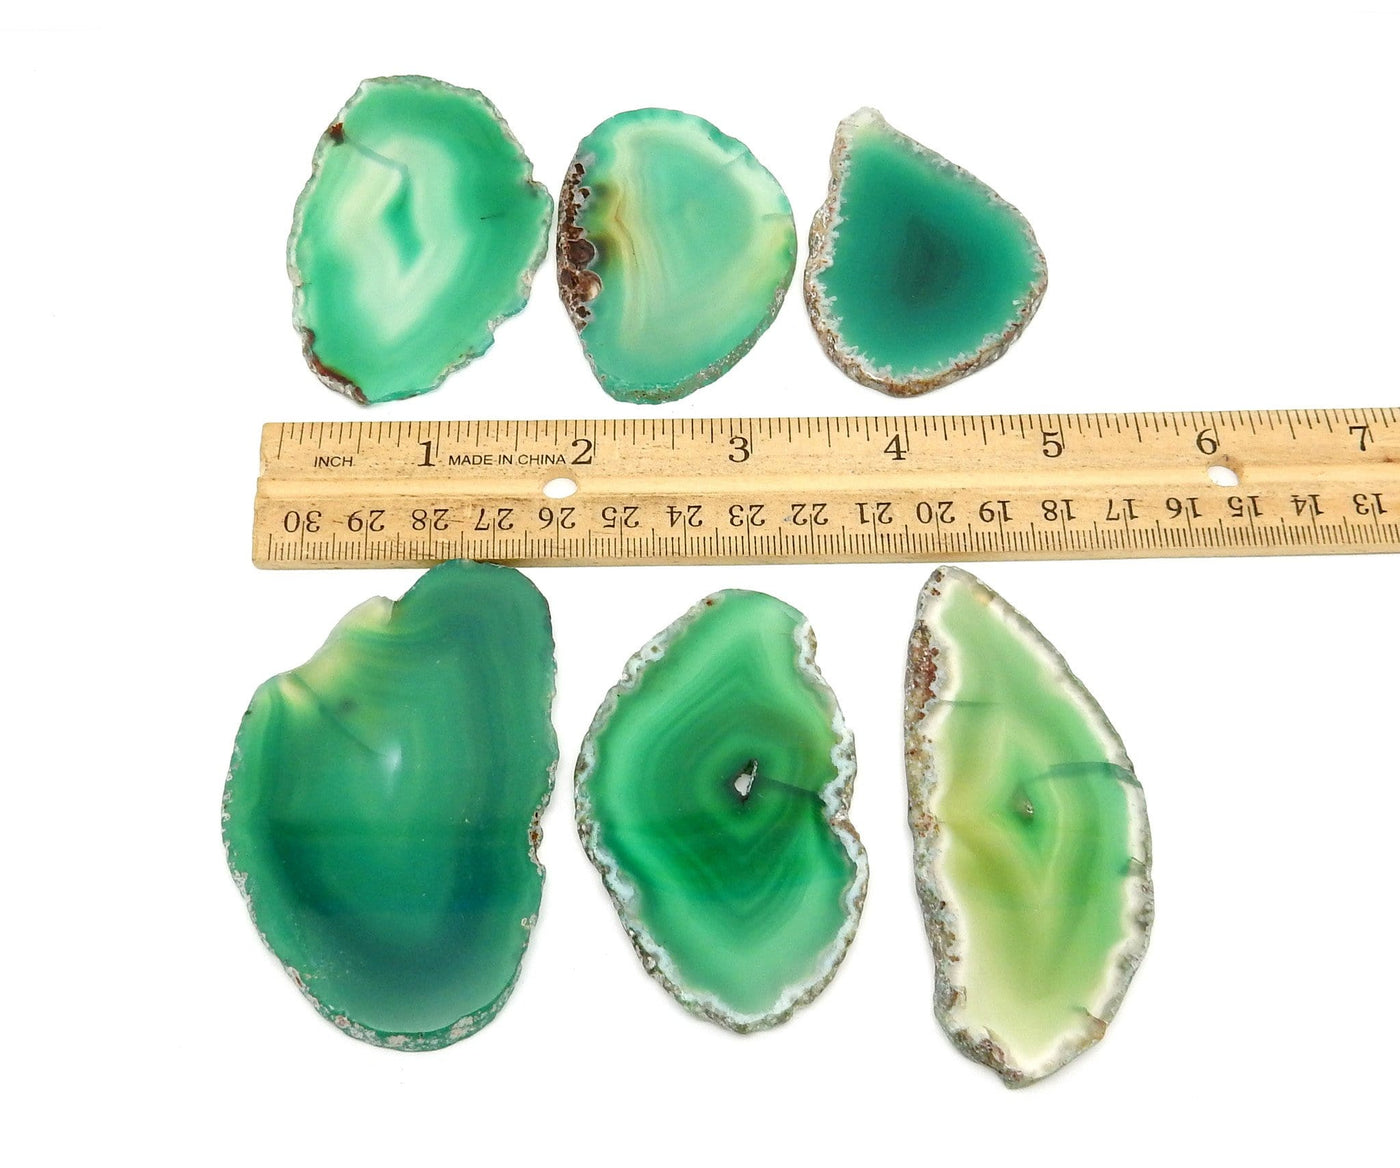 Large Green Agate Slice size # 0  next to a ruler for size reference